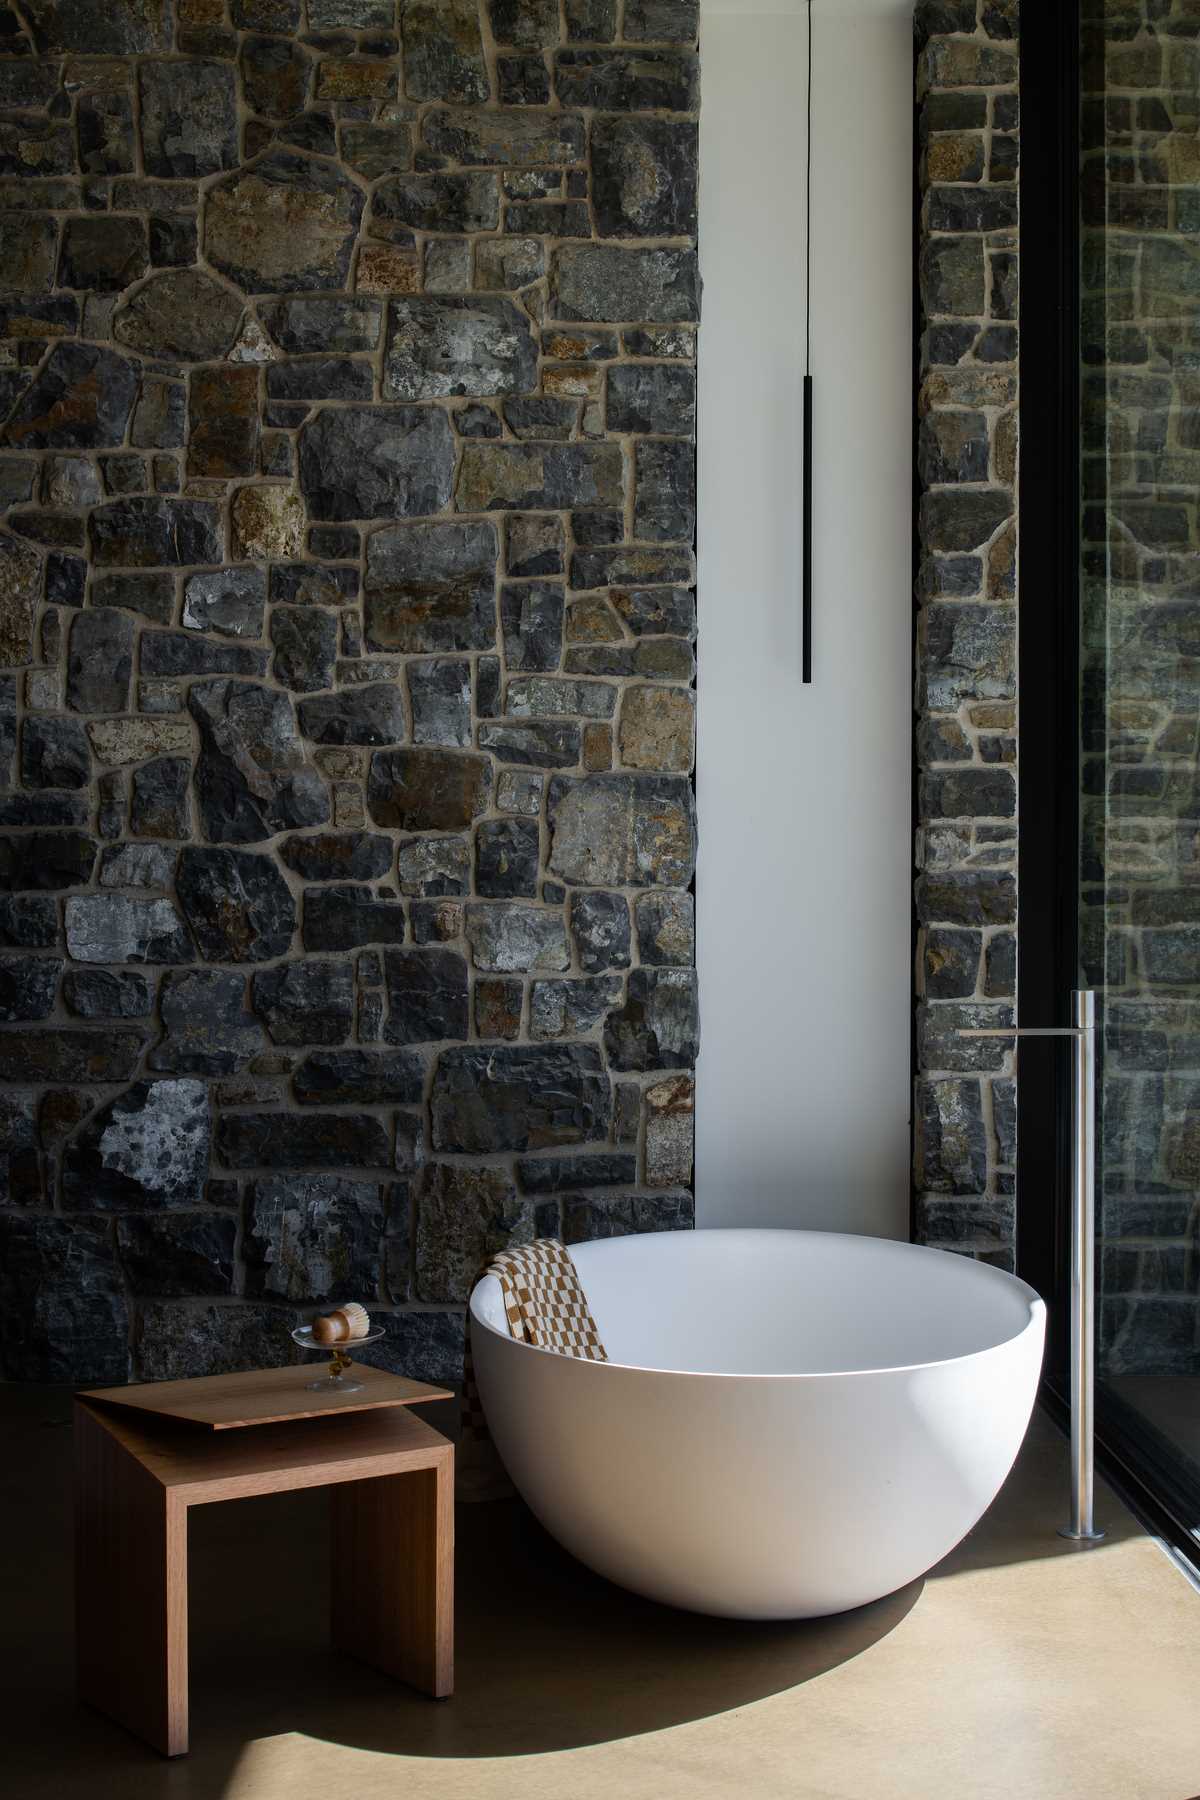 In this modern en-suite bathroom, there's stone walls, and a freestanding white bathtub positioned in front of the windows to take advantage of the ocean views